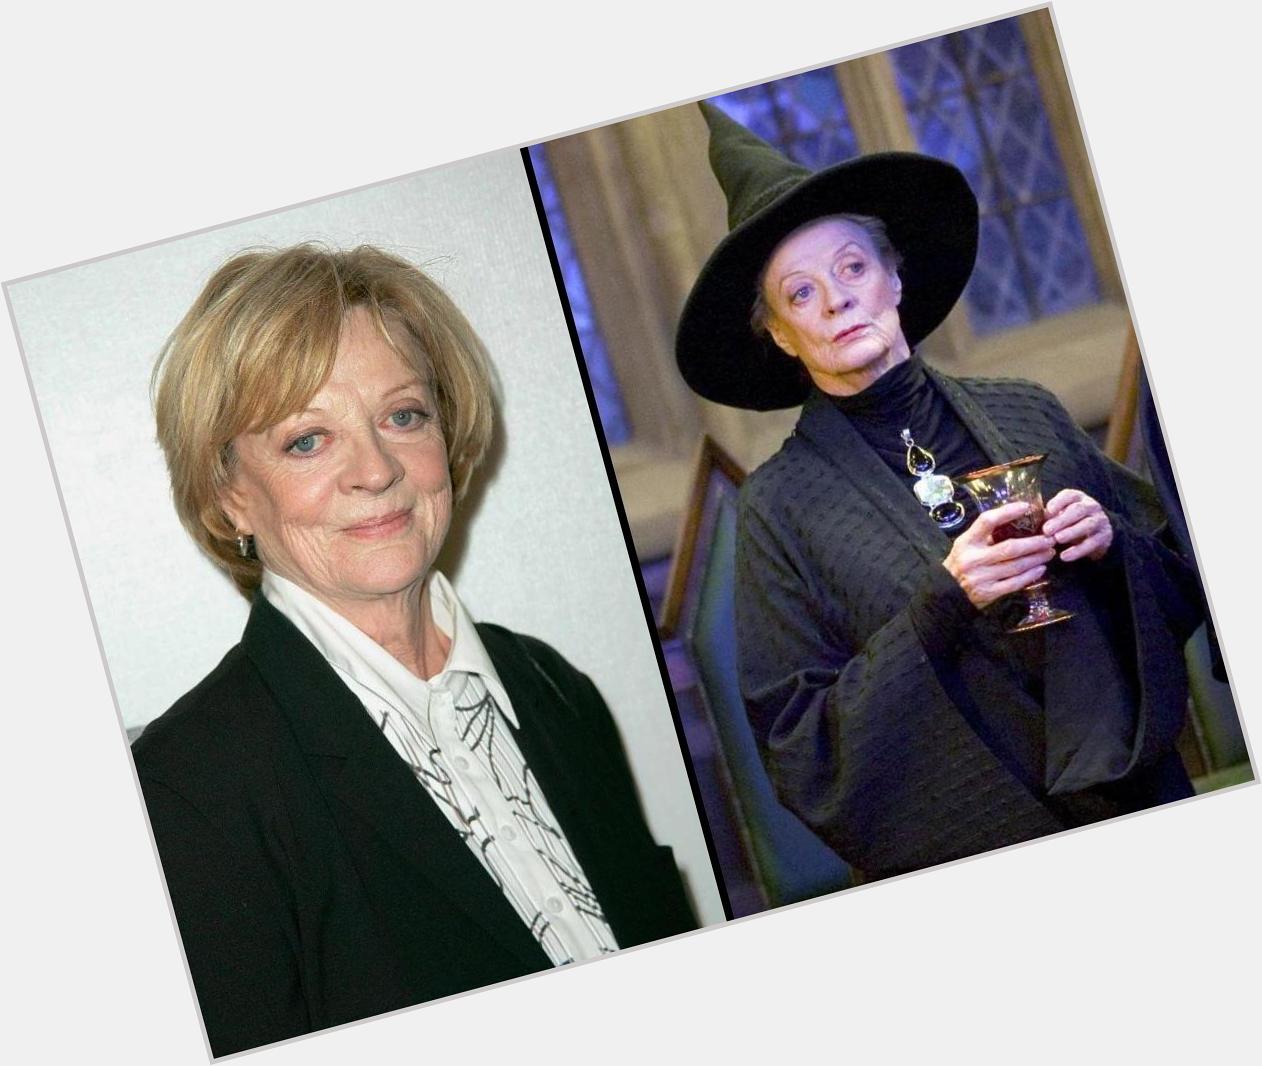 Happy 80th Birthday, Dame Maggie Smith! She played McGonagall in the Harry Potter films. 